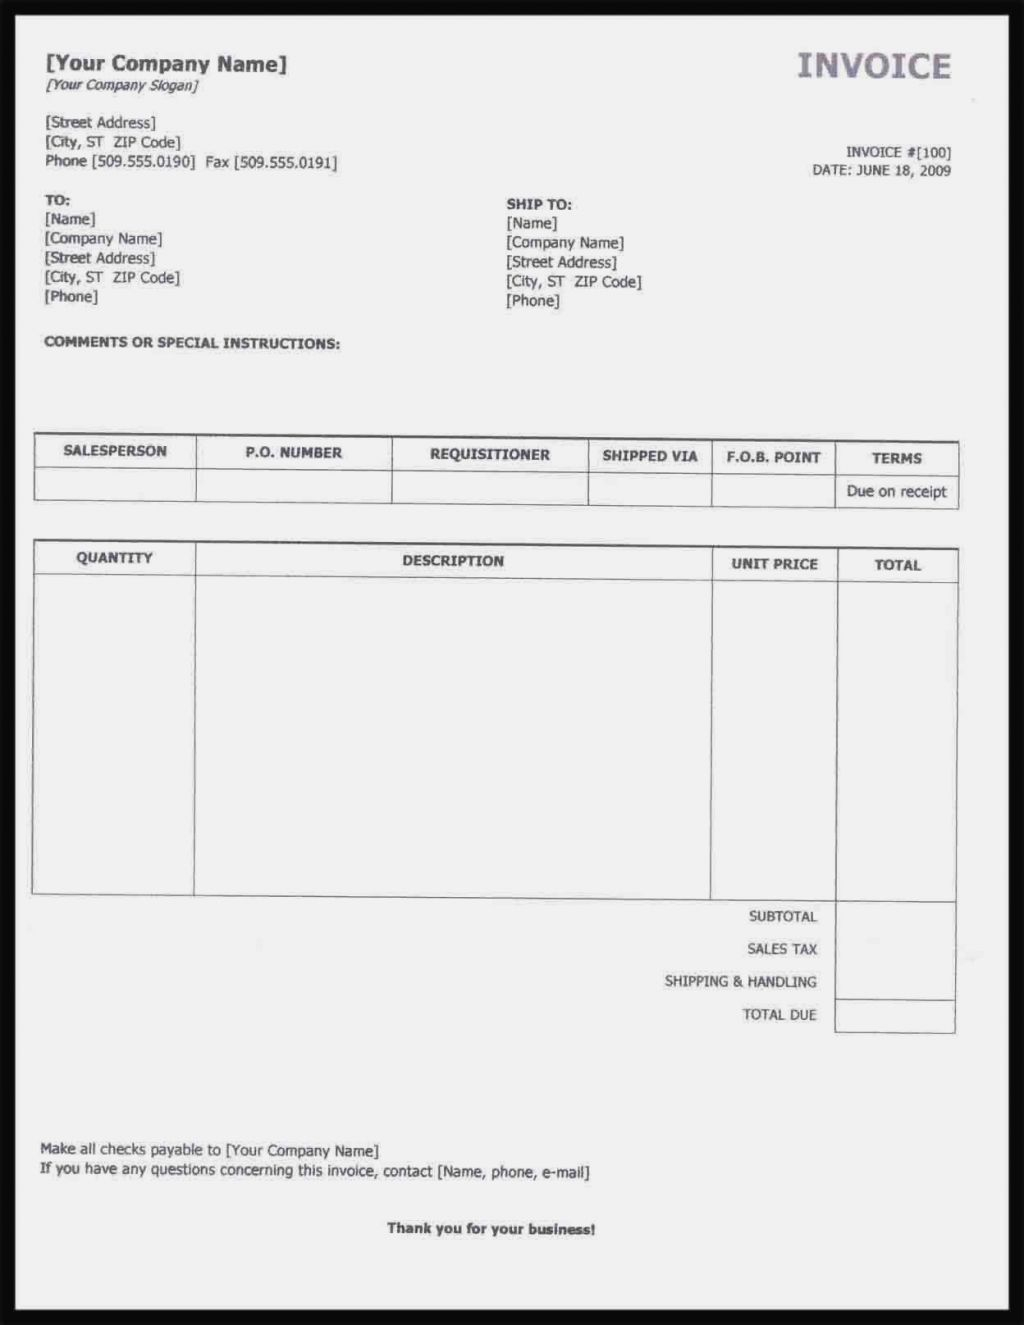 Contract Employee Invoice Template Free Contractor Invoice Forms in dimensions 1024 X 1325